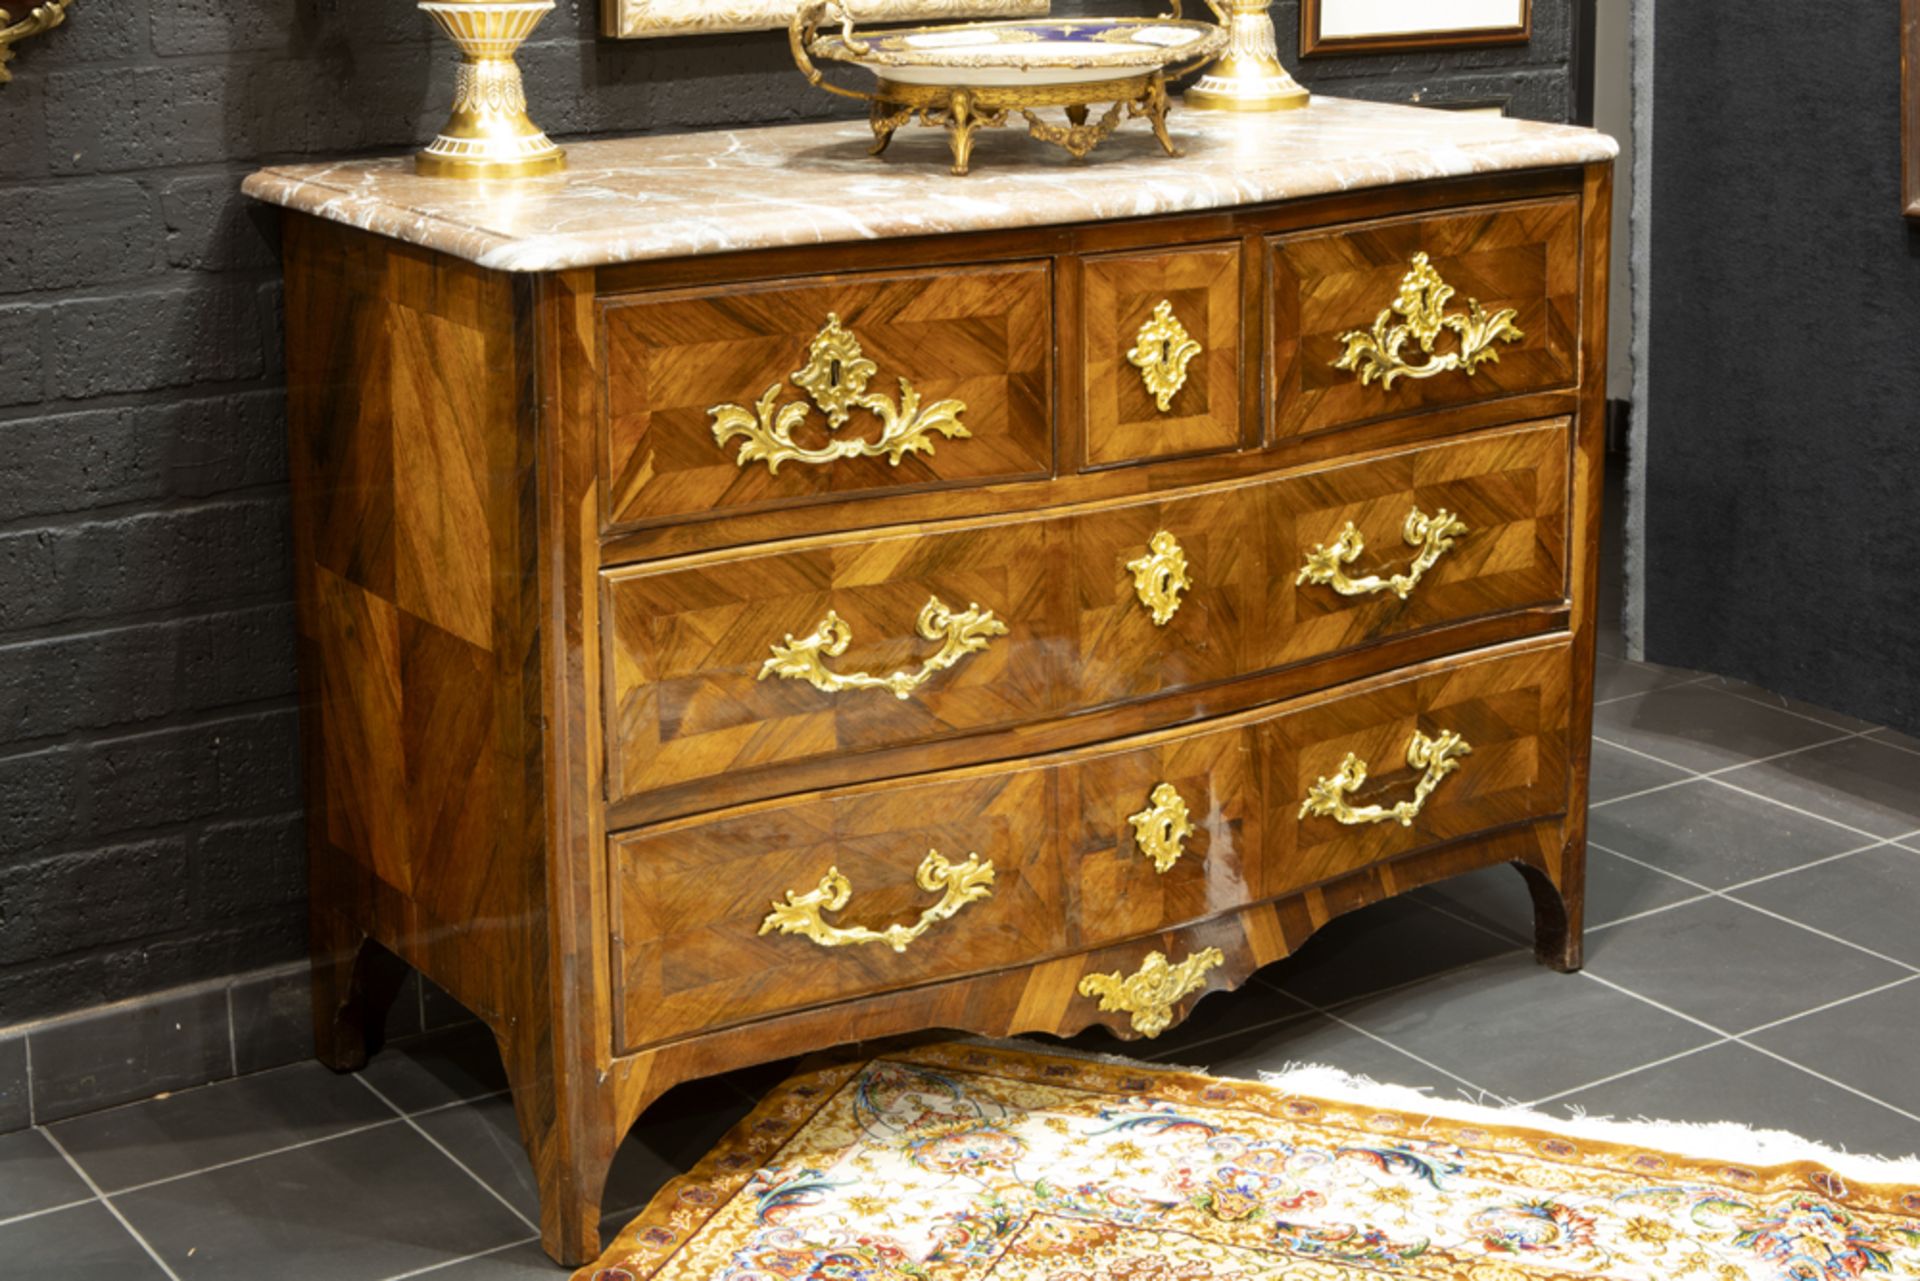 18th Cent. French Louis XV period chest of drawers in polished rose-wood with rich mountings in